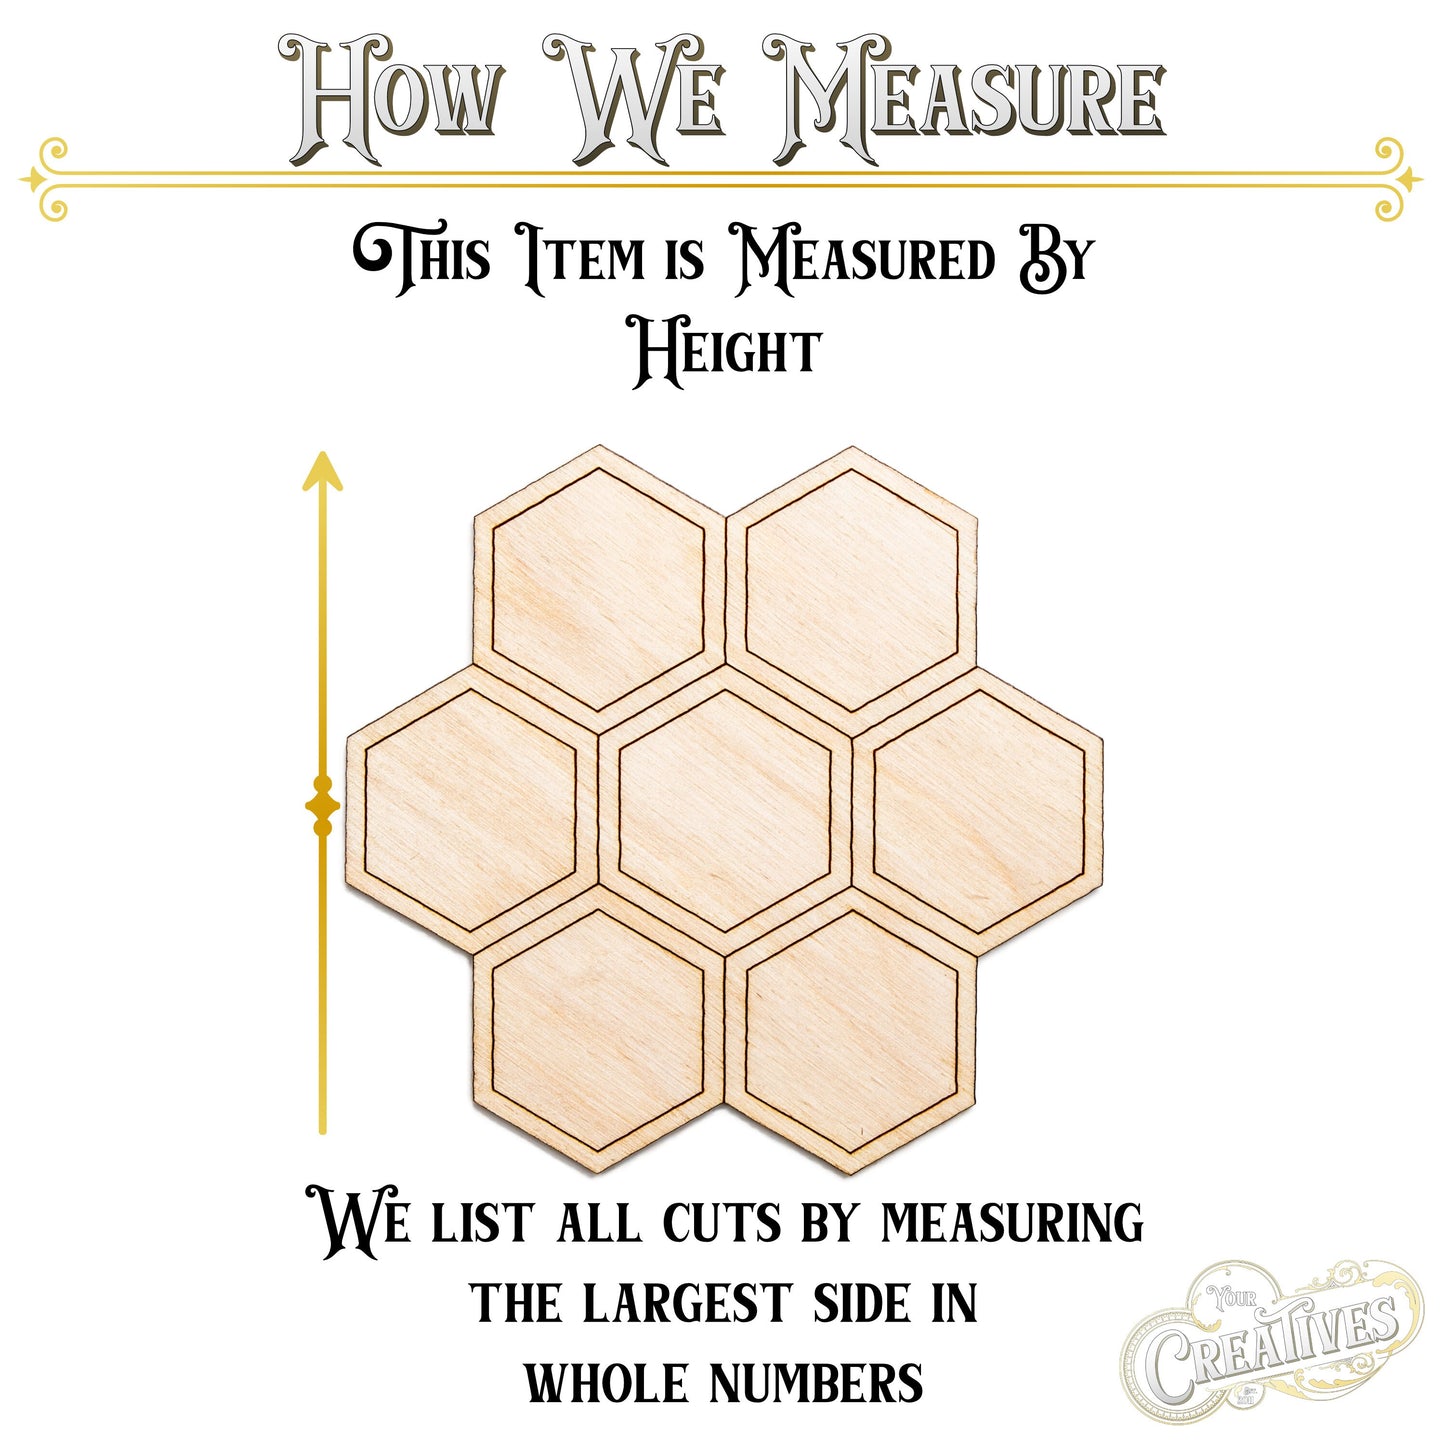 Honeycomb-Round-Wood Cutout-Solid Line Etch-Honey Bee Theme Decor-Various Sizes-Honeycomb Wood Accents-Geometric Shapes-Hexagon Shape-Bees